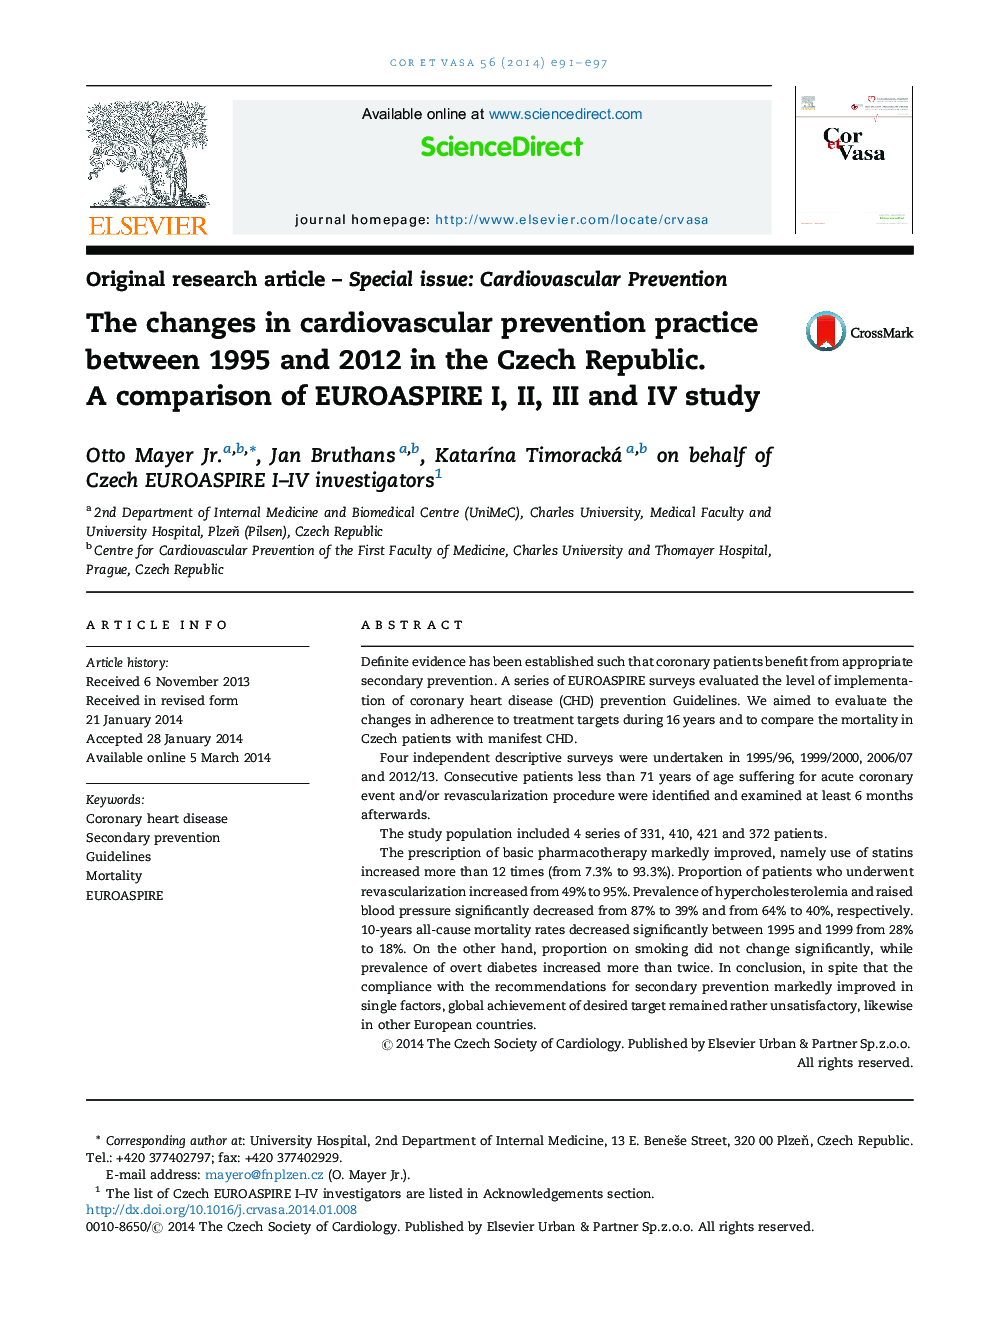 Original research article - Special issue: Cardiovascular PreventionThe changes in cardiovascular prevention practice between 1995 and 2012 in the Czech Republic. A comparison of EUROASPIRE I, II, III and IV study